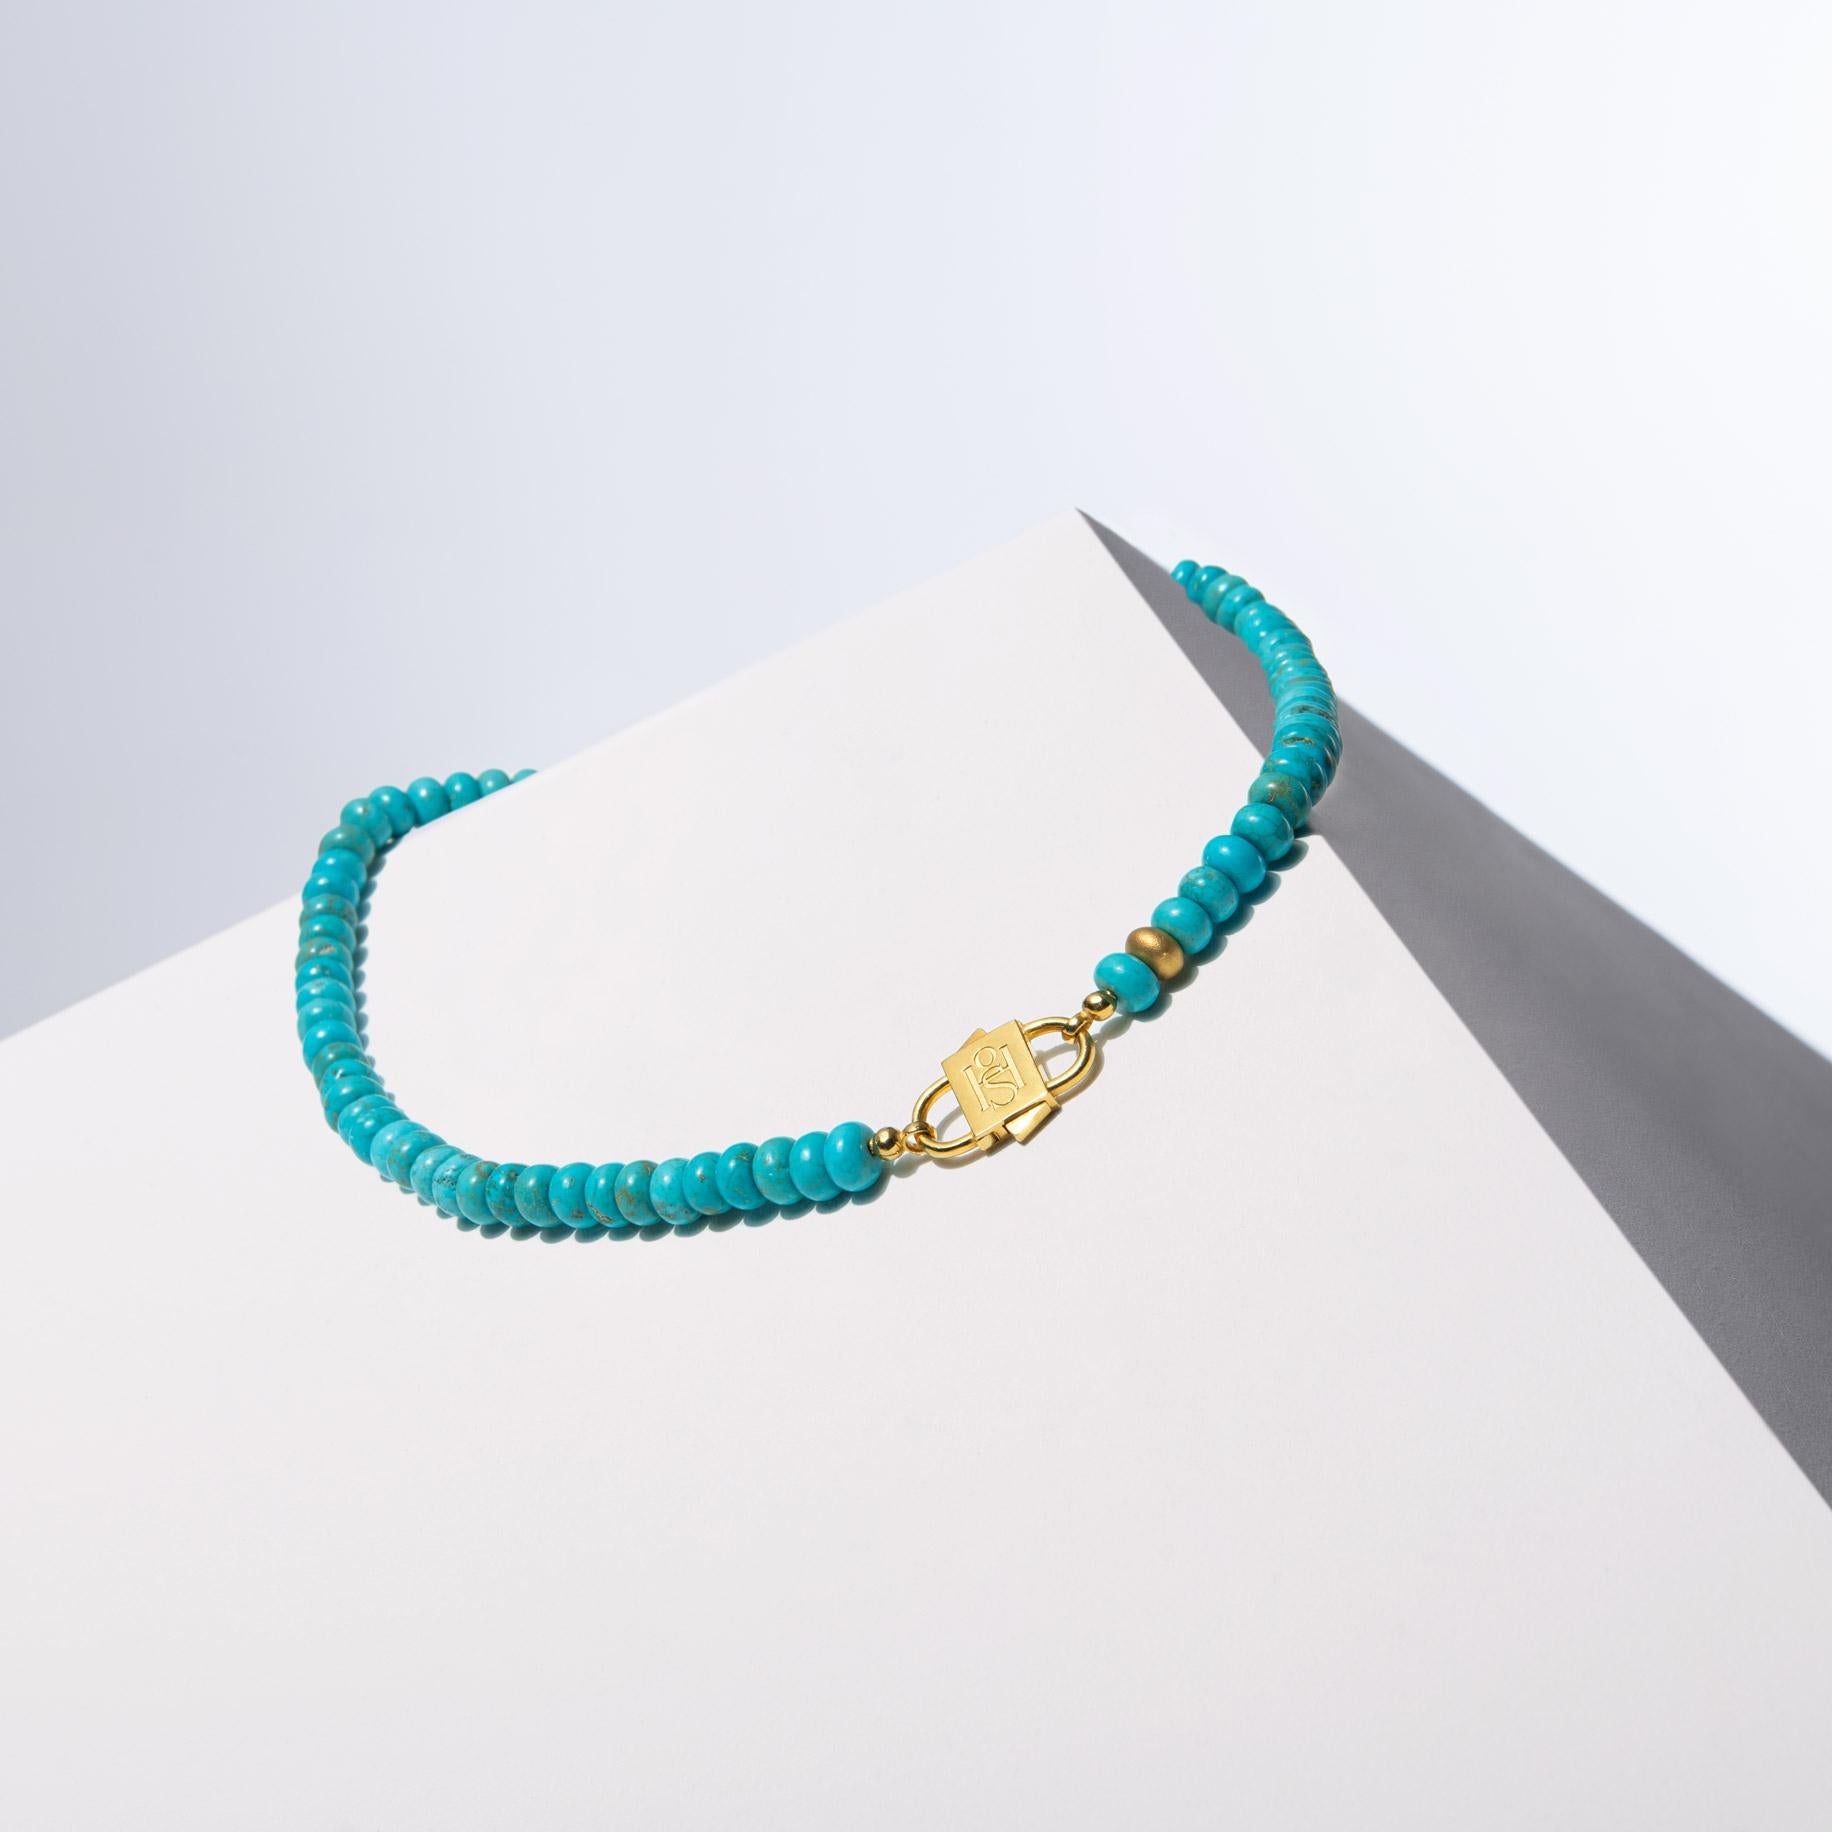 - Crafted with 8mm turquoise howlite rondelle beads, each bead adding to the uniqueness of the design with its natural texture and color variations.
- The design is elevated with a sandblasted, gold-filled silver bead, introducing an added layer of